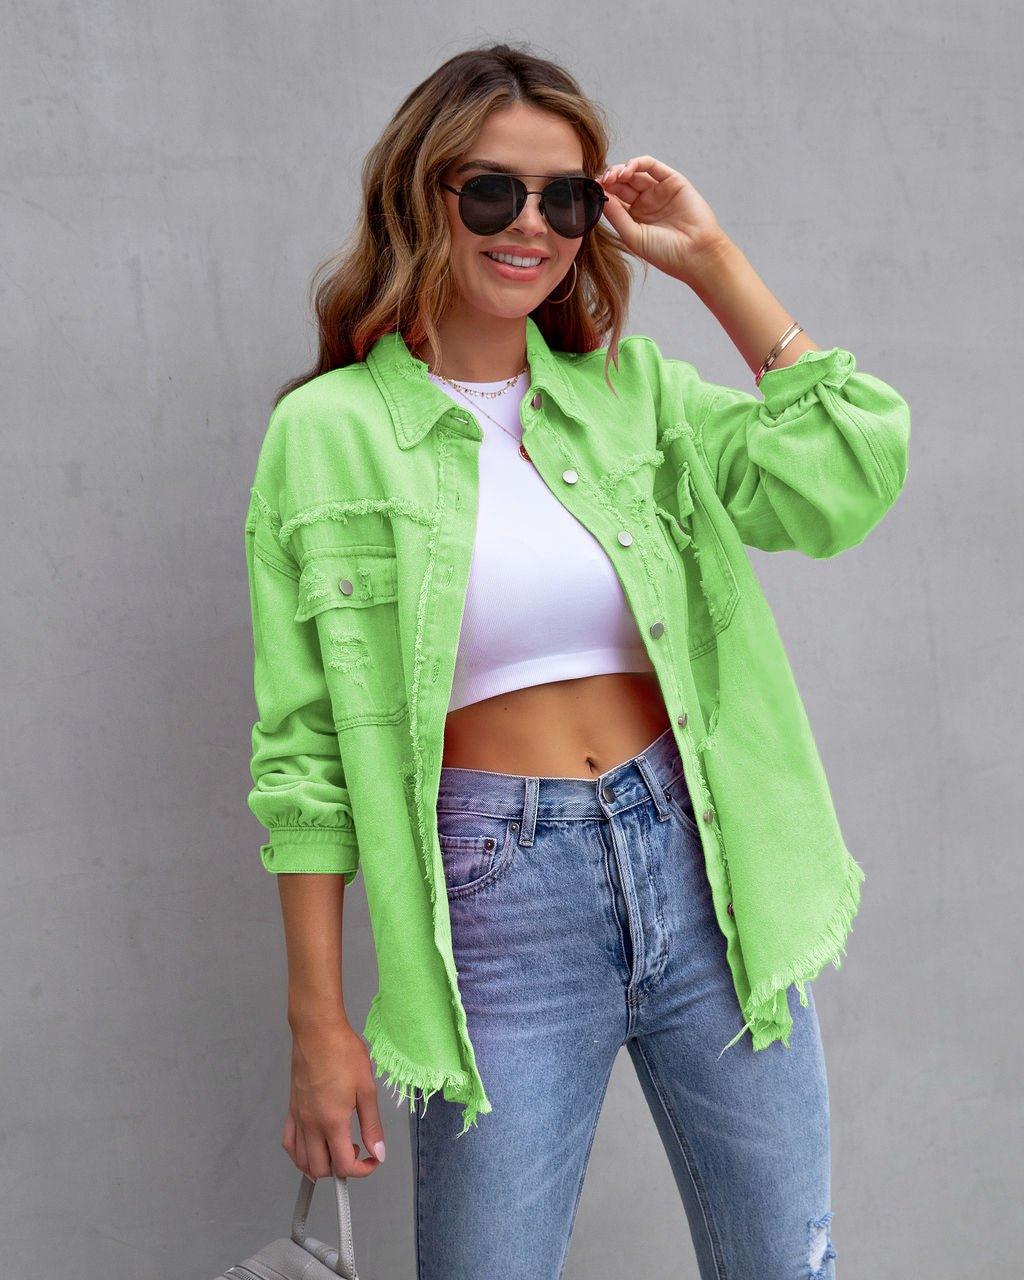 Fashion Ripped Shirt Jacket Female Autumn And Spring Casual Tops Womens Clothing - AVINCET